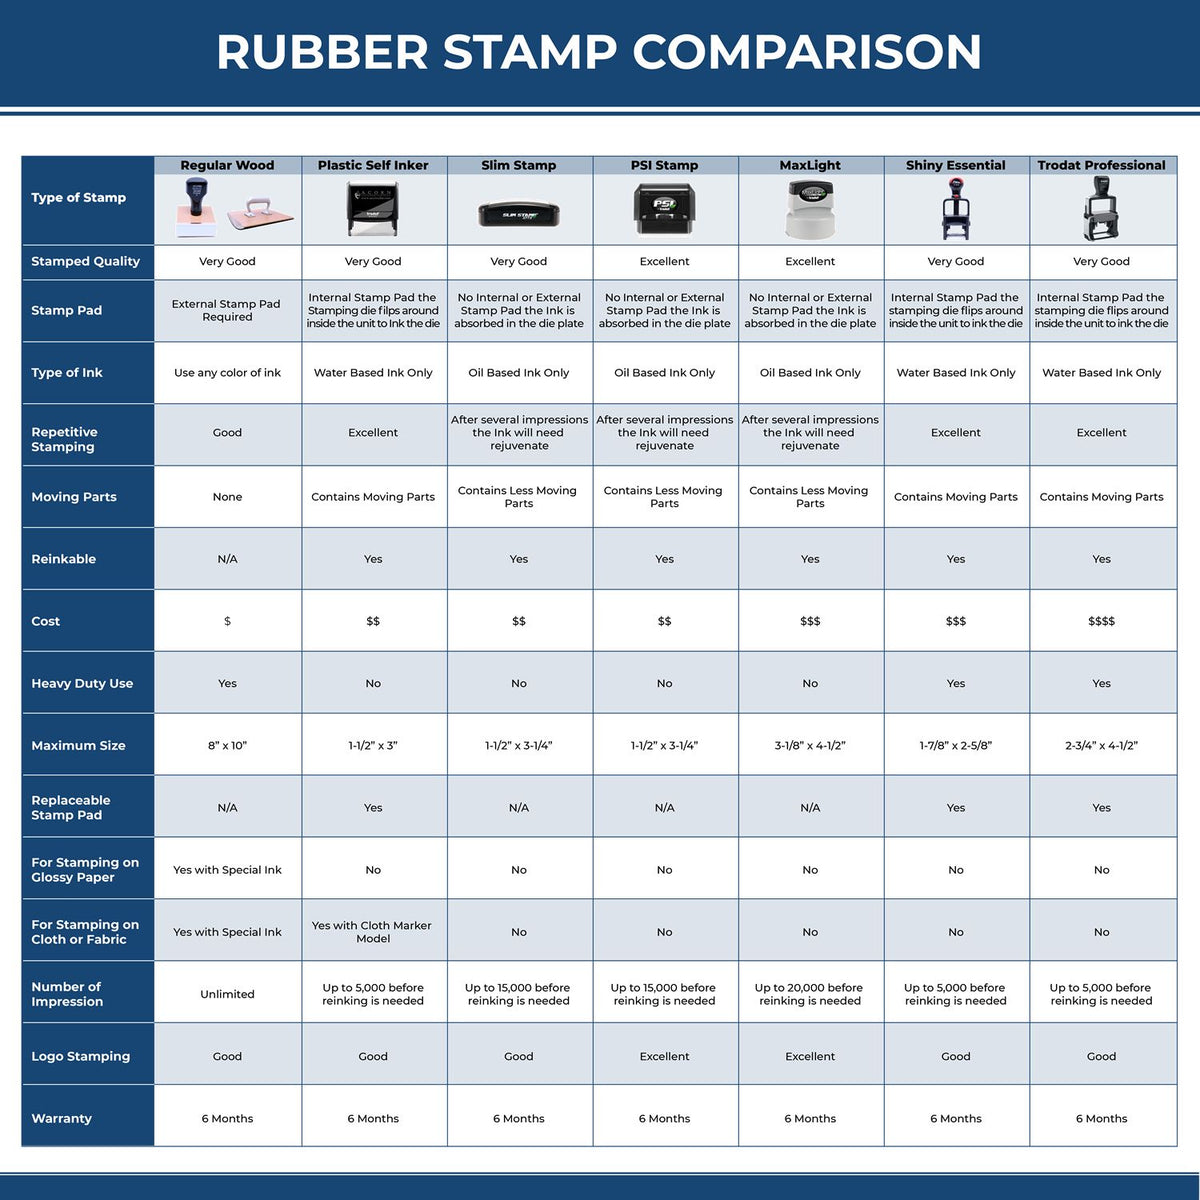 A comparison chart for the different types of mount models available for the Premium MaxLight Pre-Inked Nebraska Engineering Stamp.